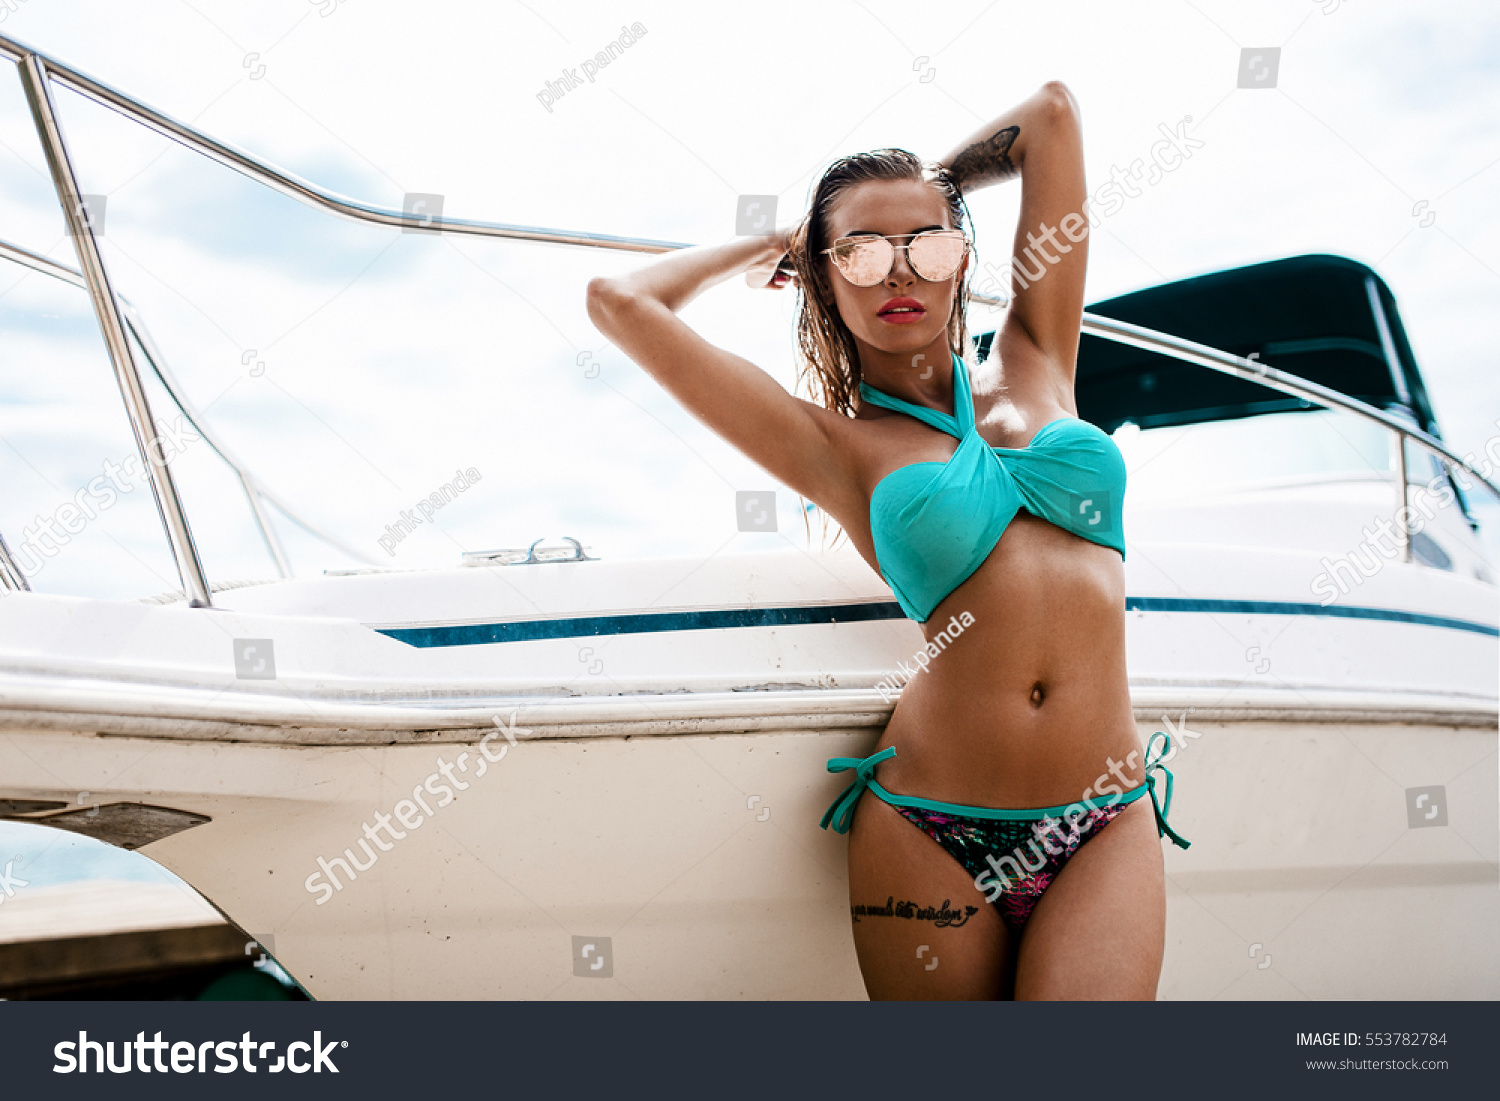 sexy girl on boat sex gallerie